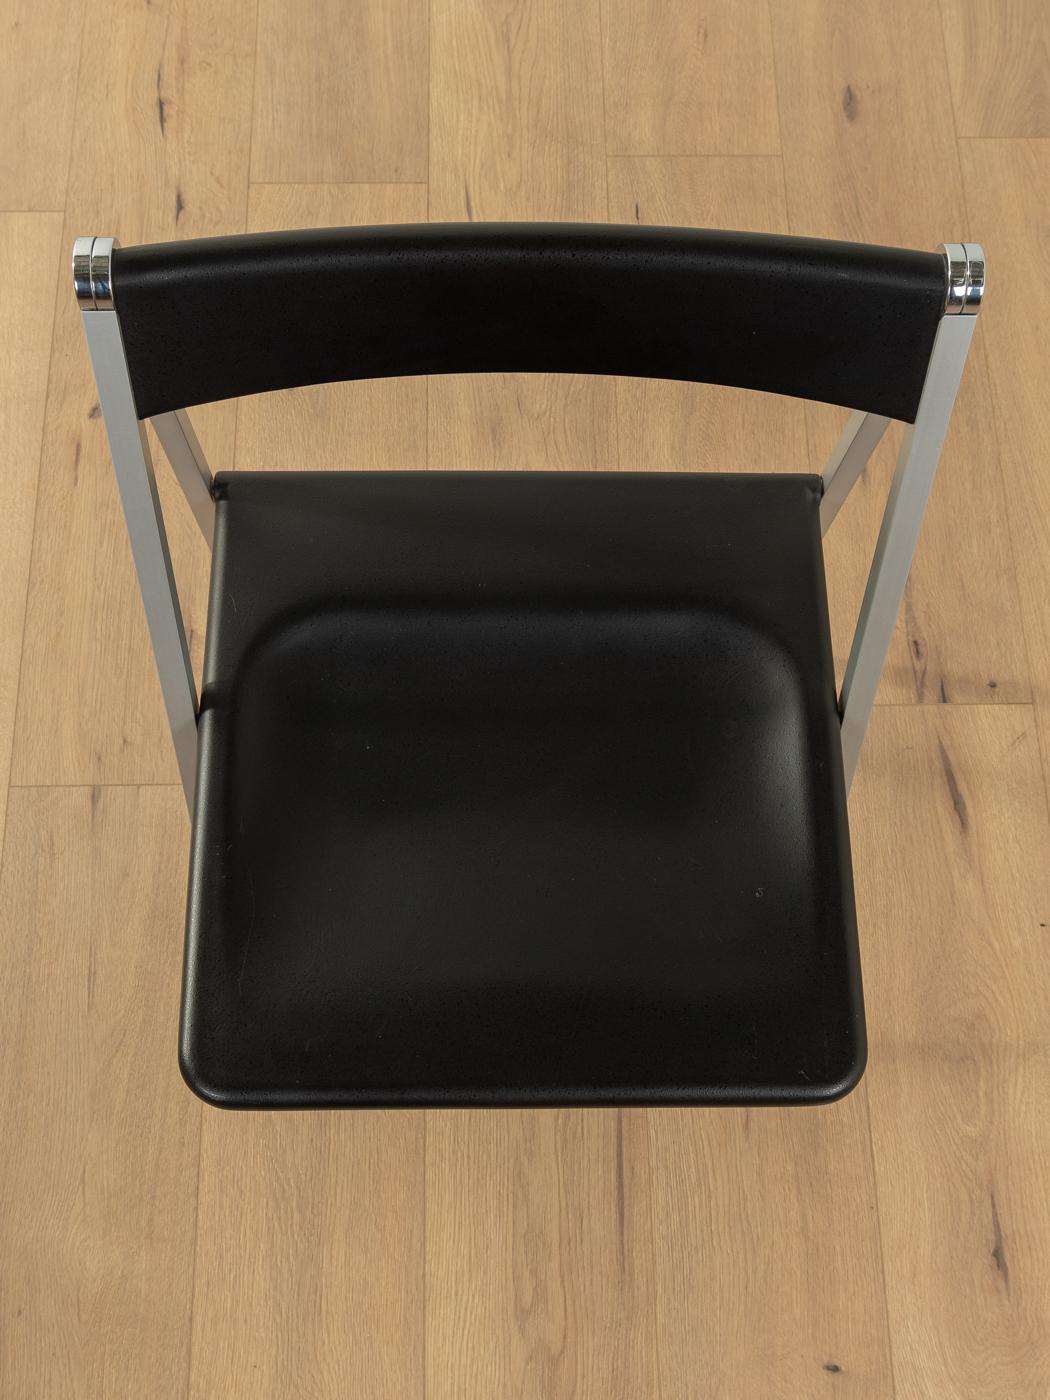 2x Team Form AG for interlübke folding chairs, Swiss Design For Sale 2